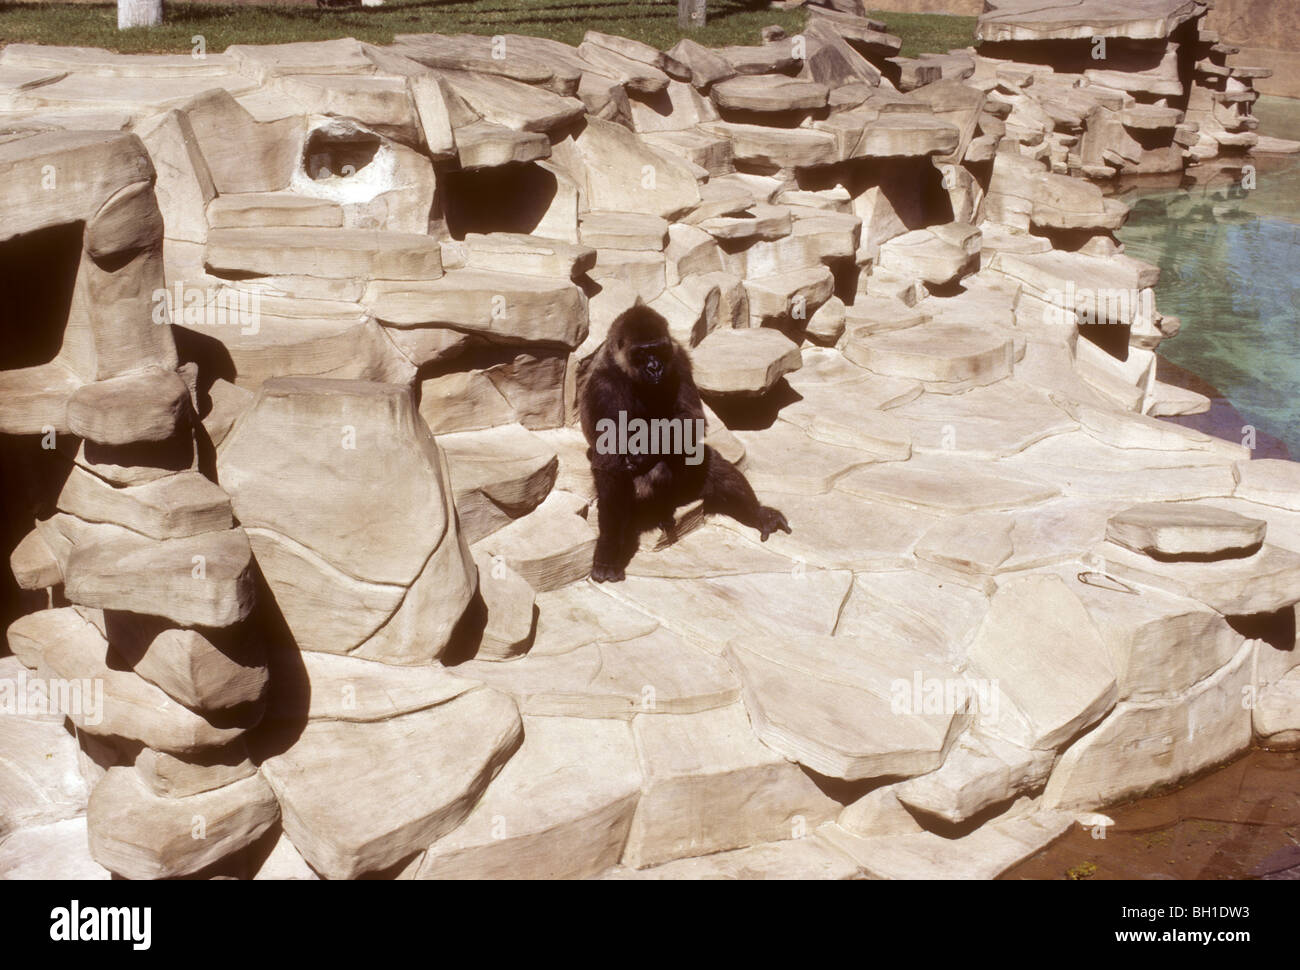 A gorilla at a zoo surrounded by concrete manmade rocks. Kodachromes of Florida tourist sites during the 1980s. Busch Gardens. Stock Photo